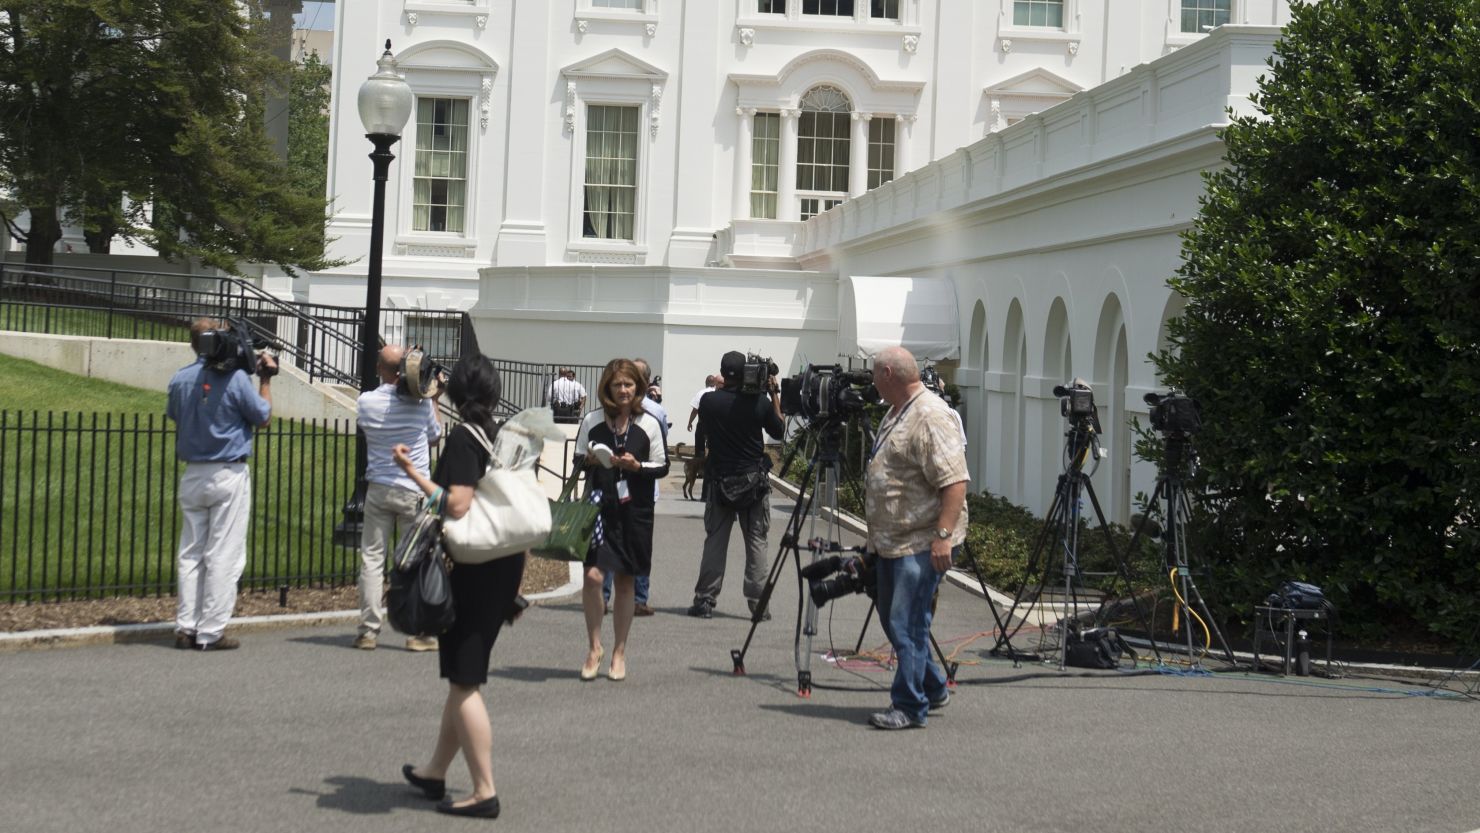 Members of the press evacuate from the Press Briefing Room at the White House following a bomb threat.